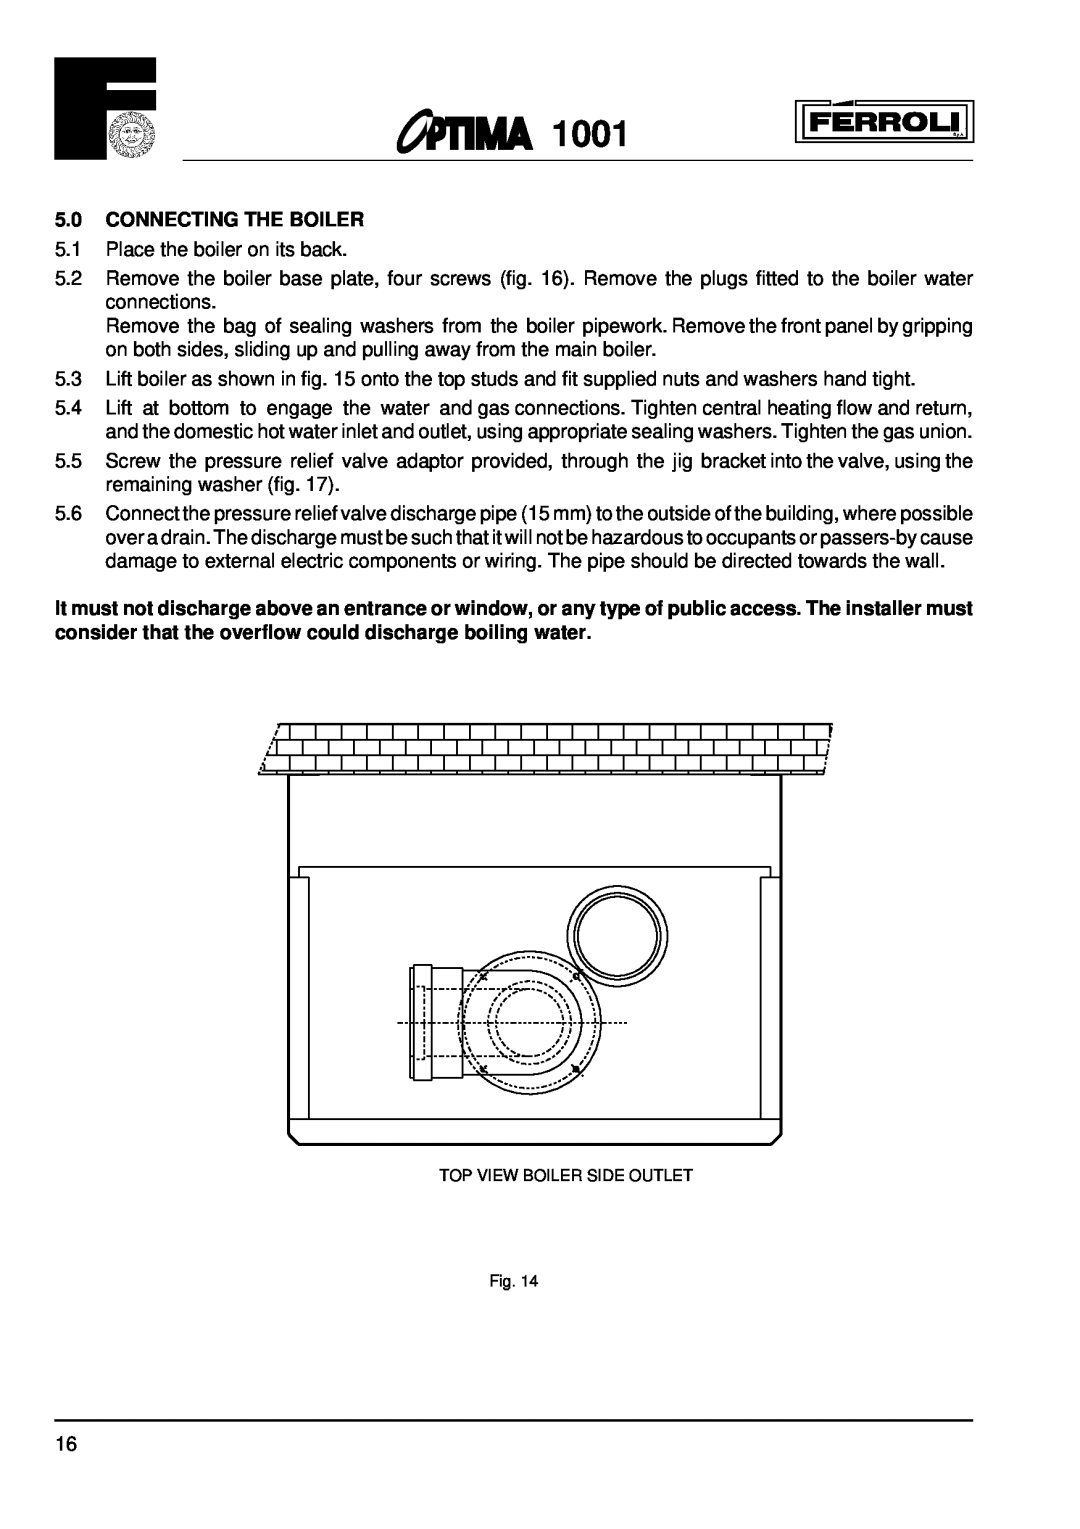 Optima Company 1001 installation instructions 5.0CONNECTING THE BOILER 